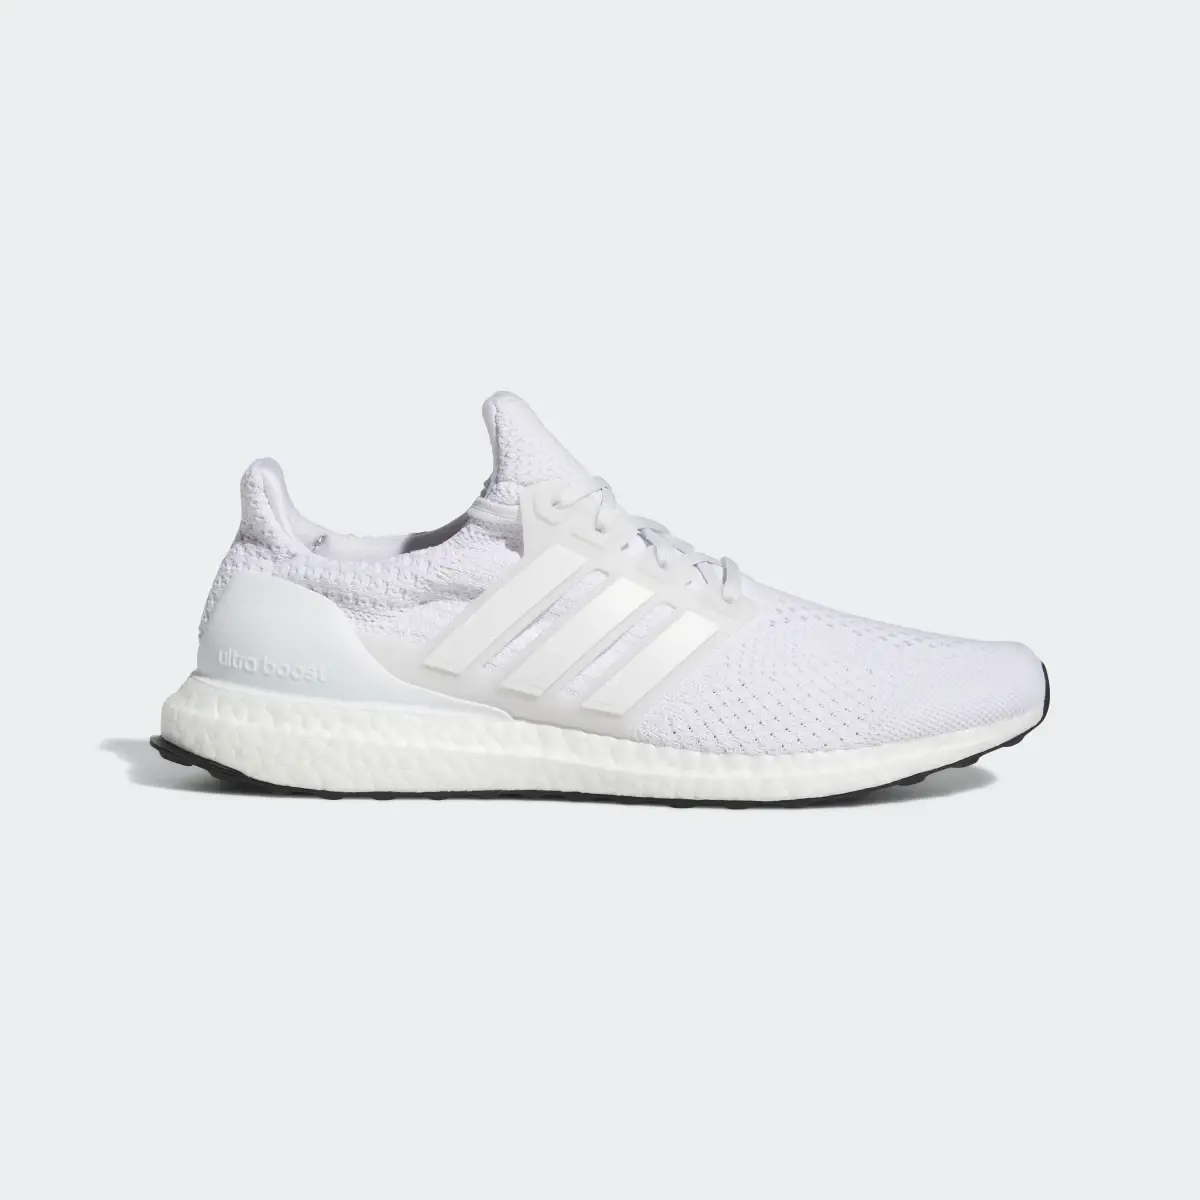 Adidas Ultraboost DNA 5.0 Shoes. 2